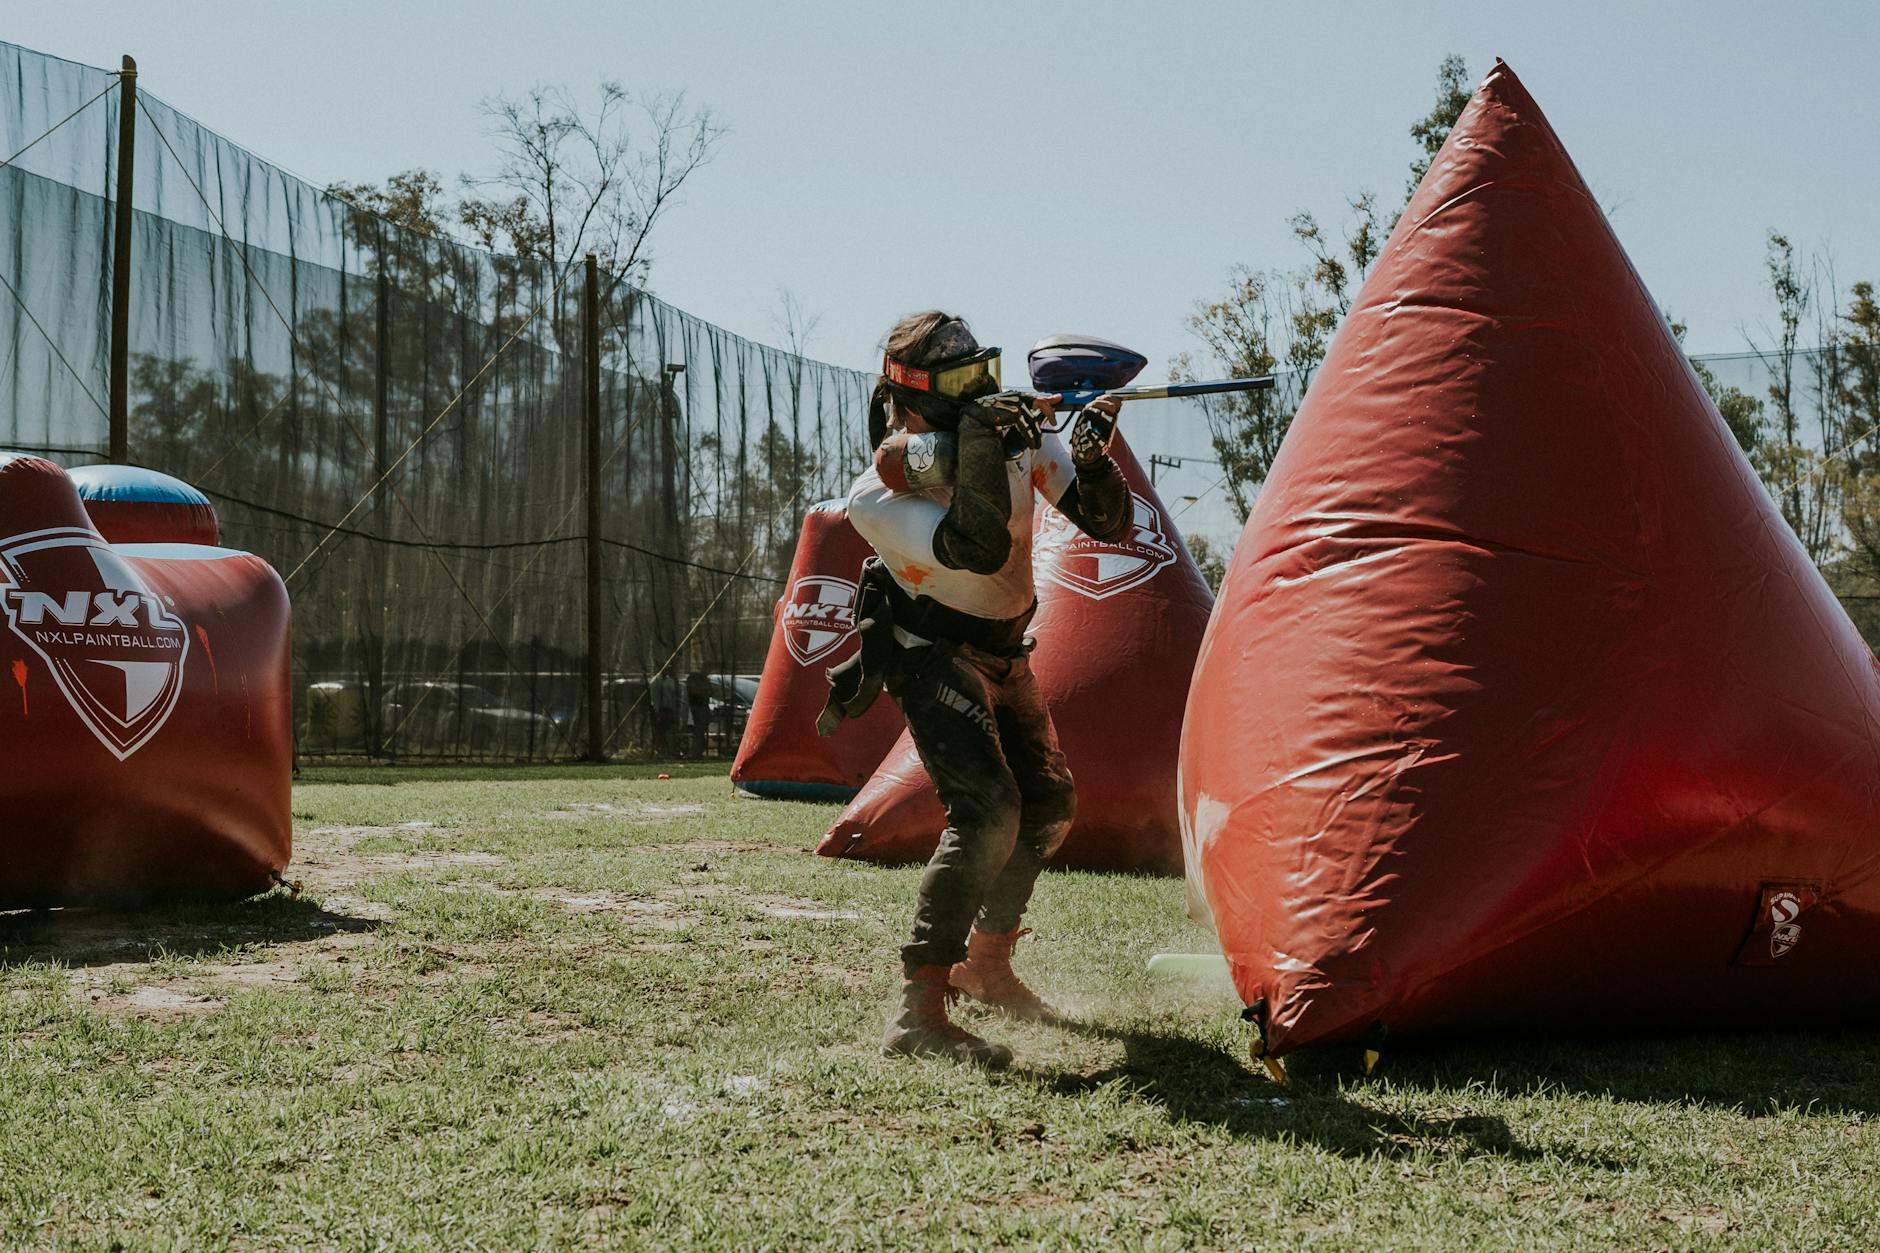 Man Readjusting His Position During a Game of Paintball